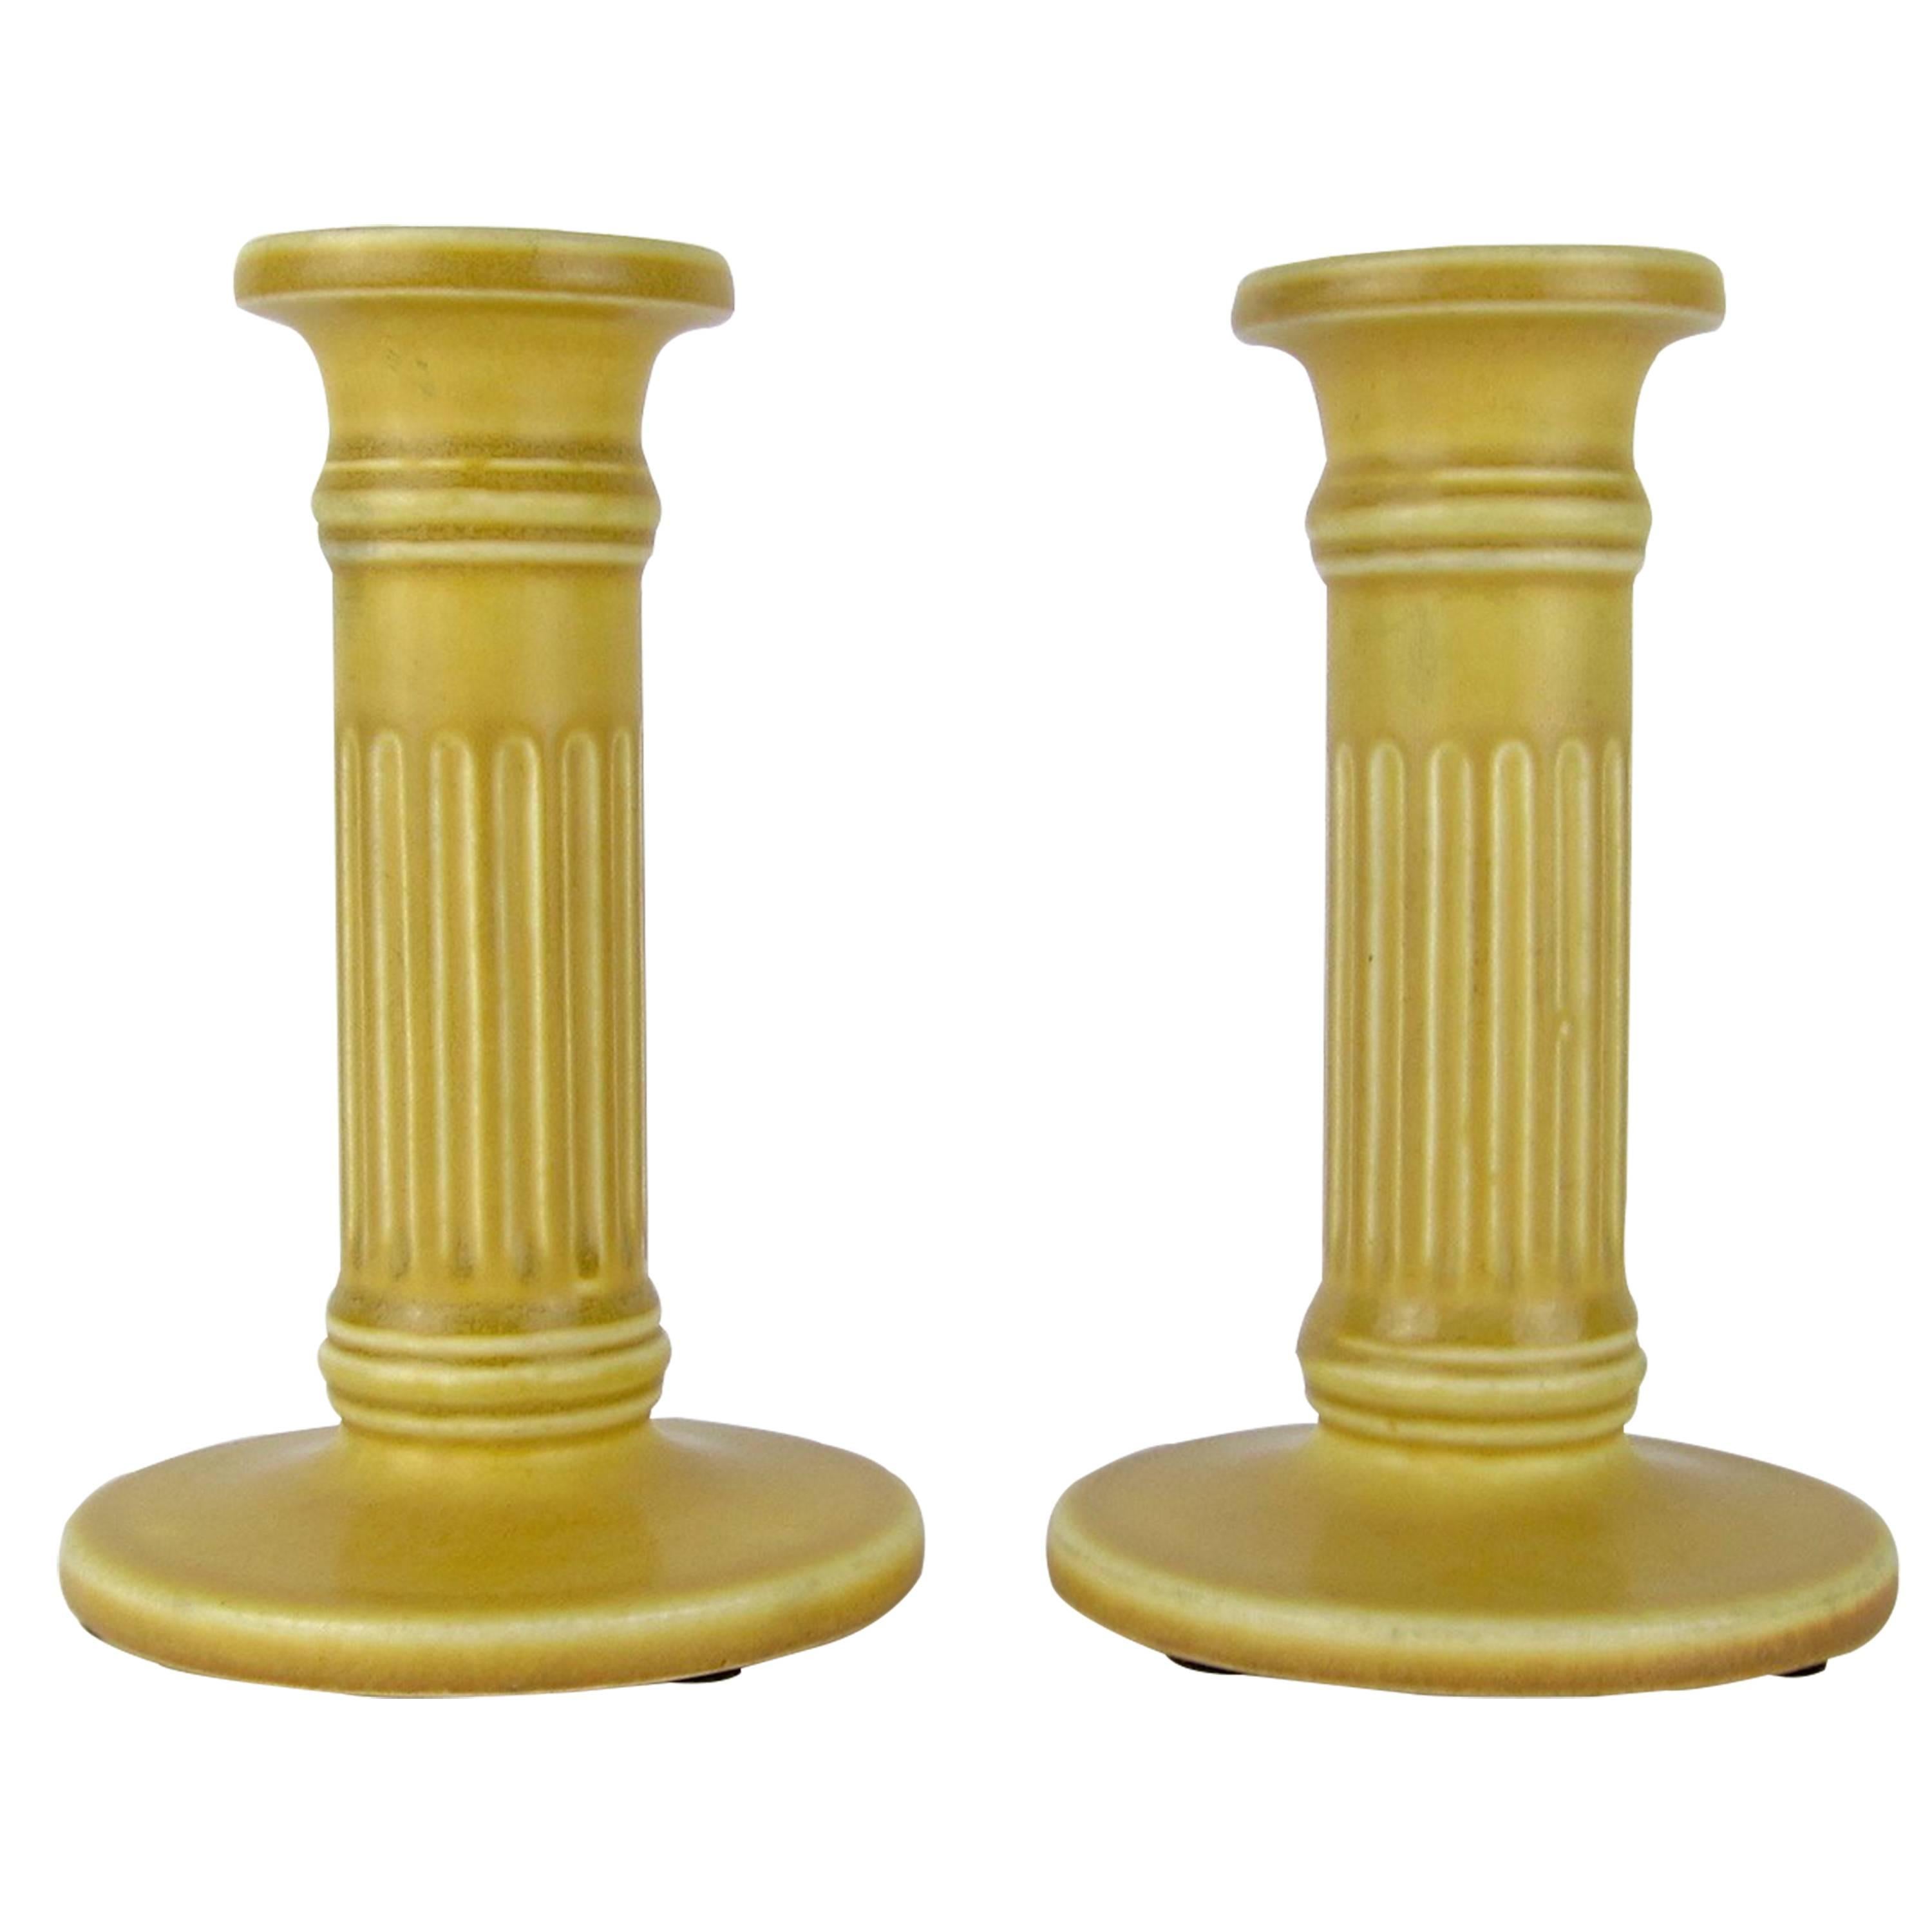 Rookwood Pottery Candlestick Pair, 1923